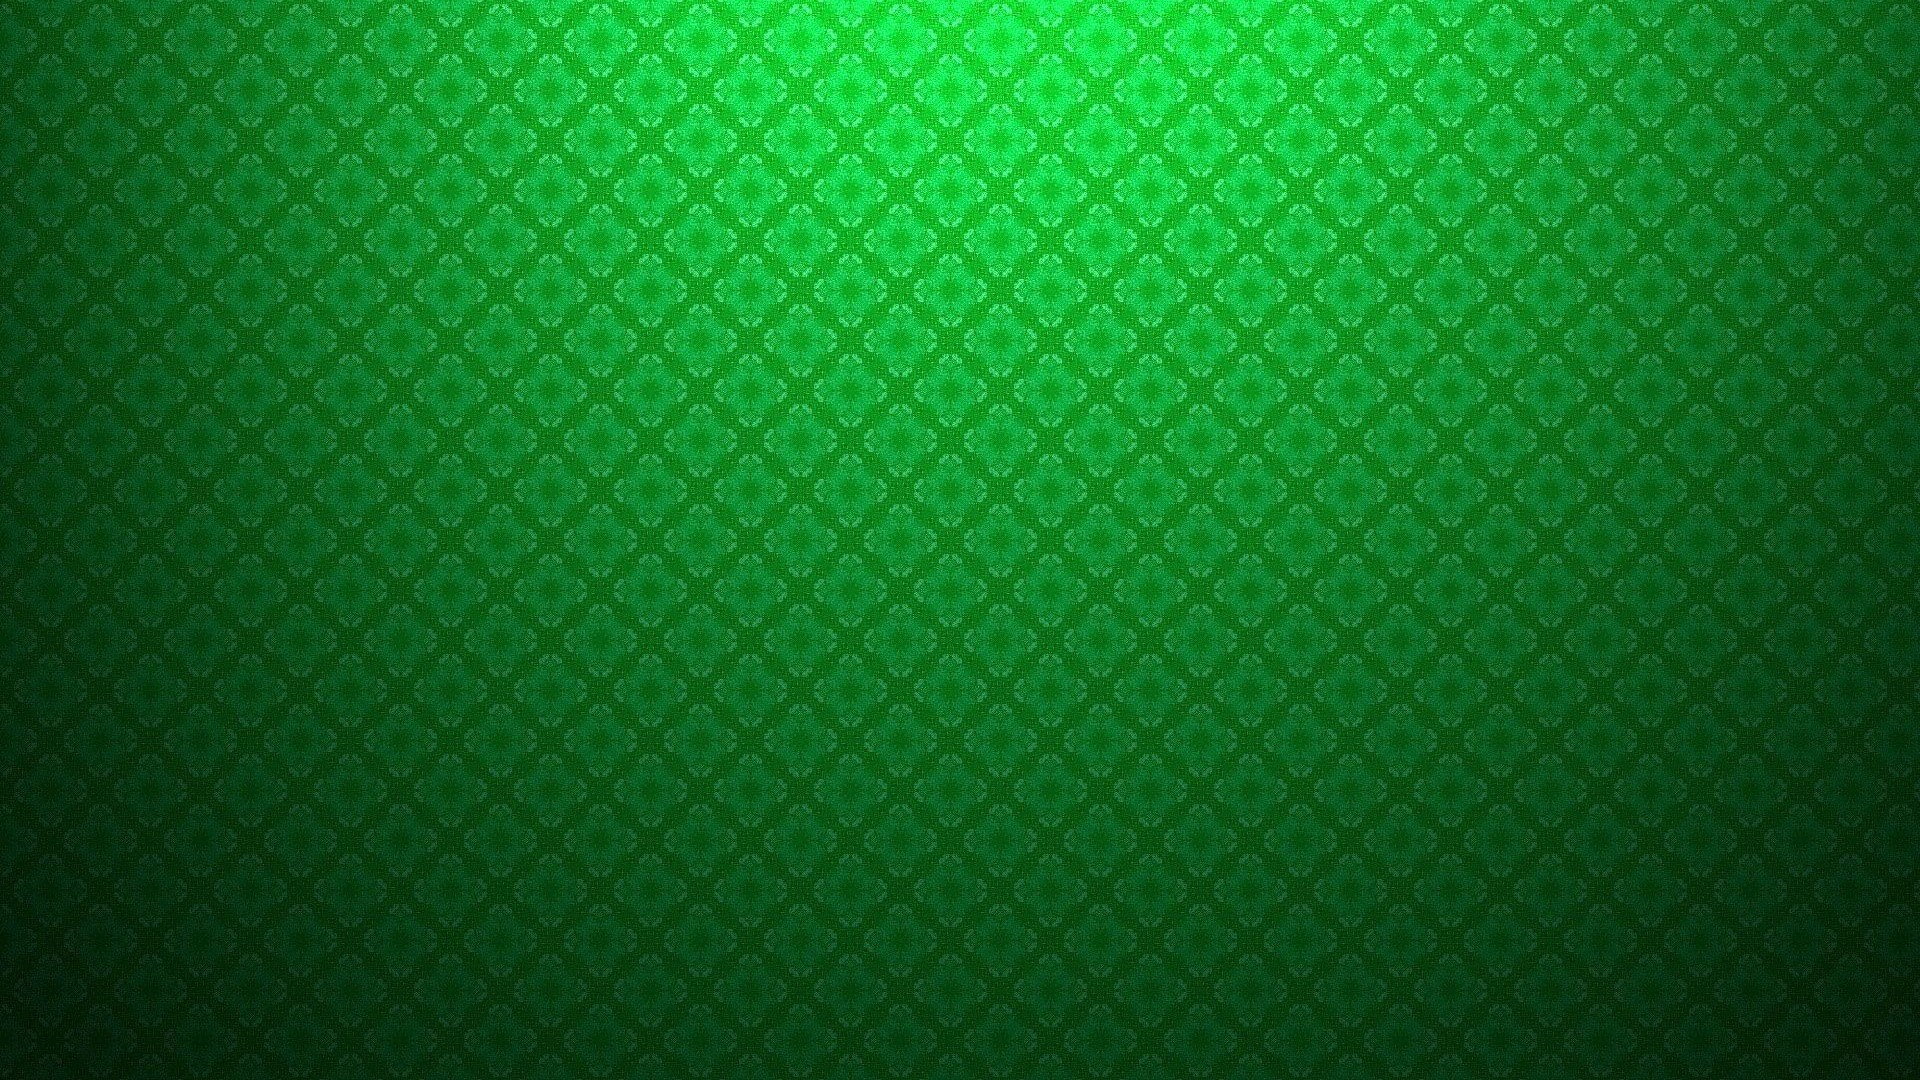 Dark Green Desktop Backgrounds with image resolution 1920x1080 pixel. You can make this wallpaper for your Desktop Computer Backgrounds, Mac Wallpapers, Android Lock screen or iPhone Screensavers